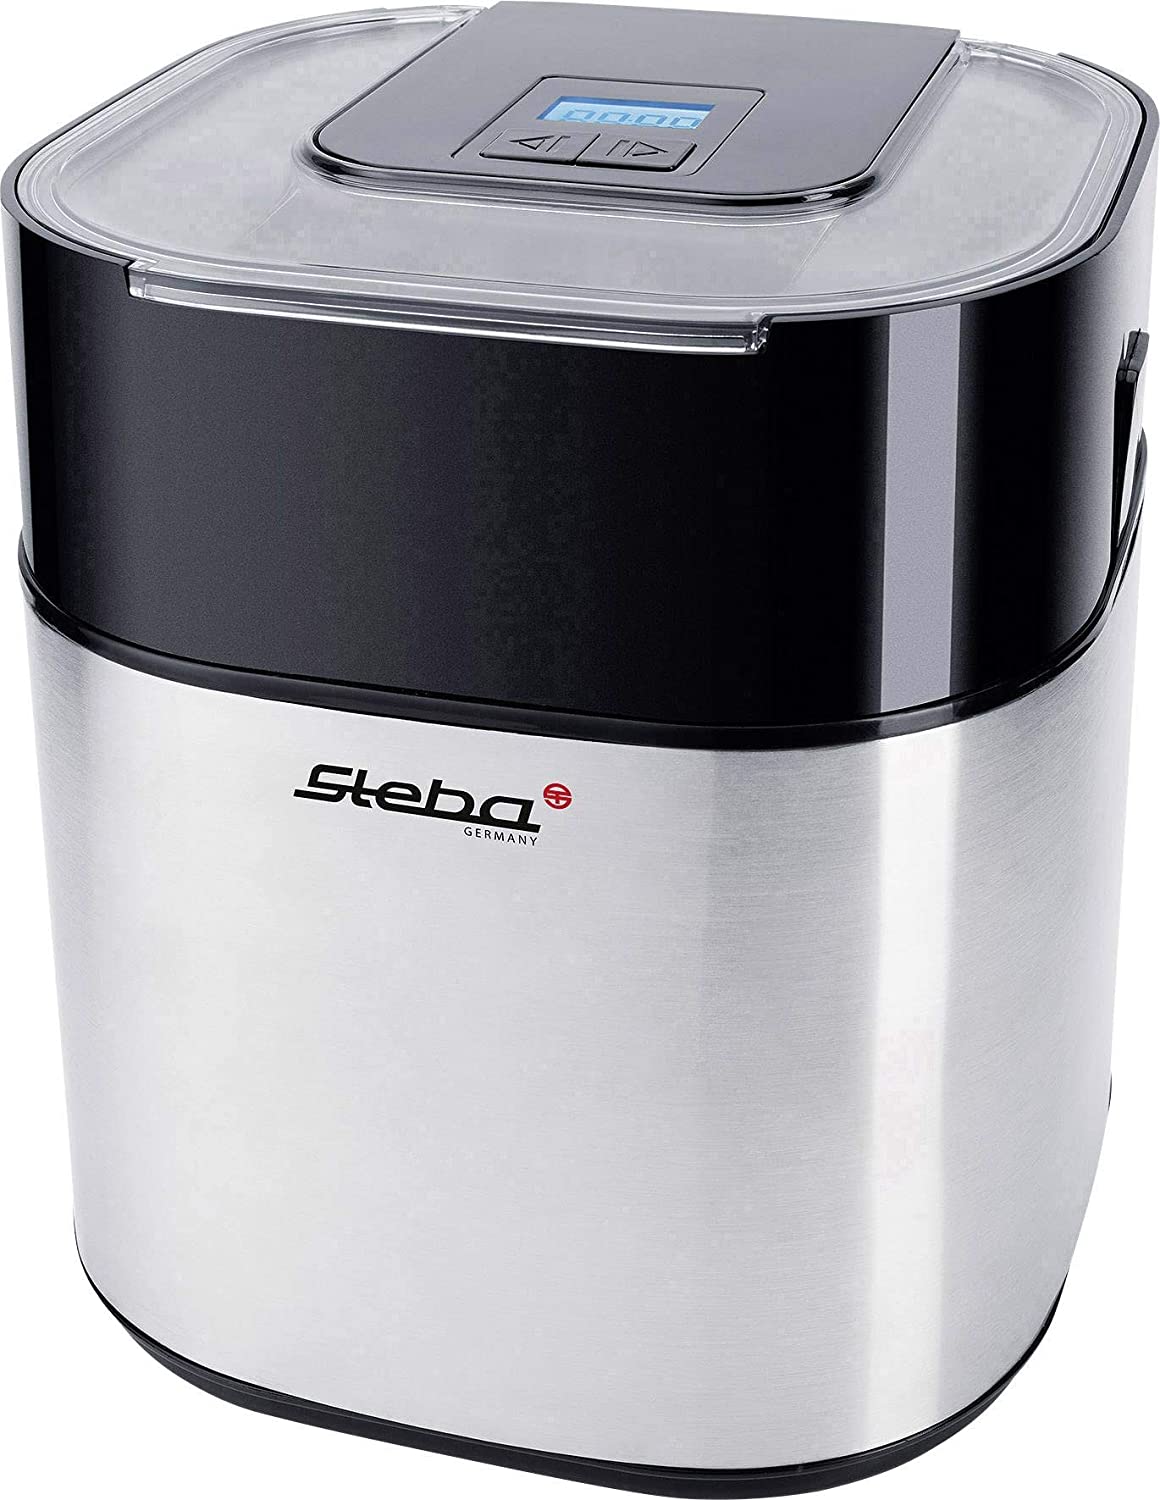 Steba IC 30 Ice Cream Maker Stainless Steel Housing Insulating Container with 1.5 Litre Volume Timer 20 to 40 Minutes LCD Display Lid with Refill Opening Fully Dismantable Including Ice Cream Scoop